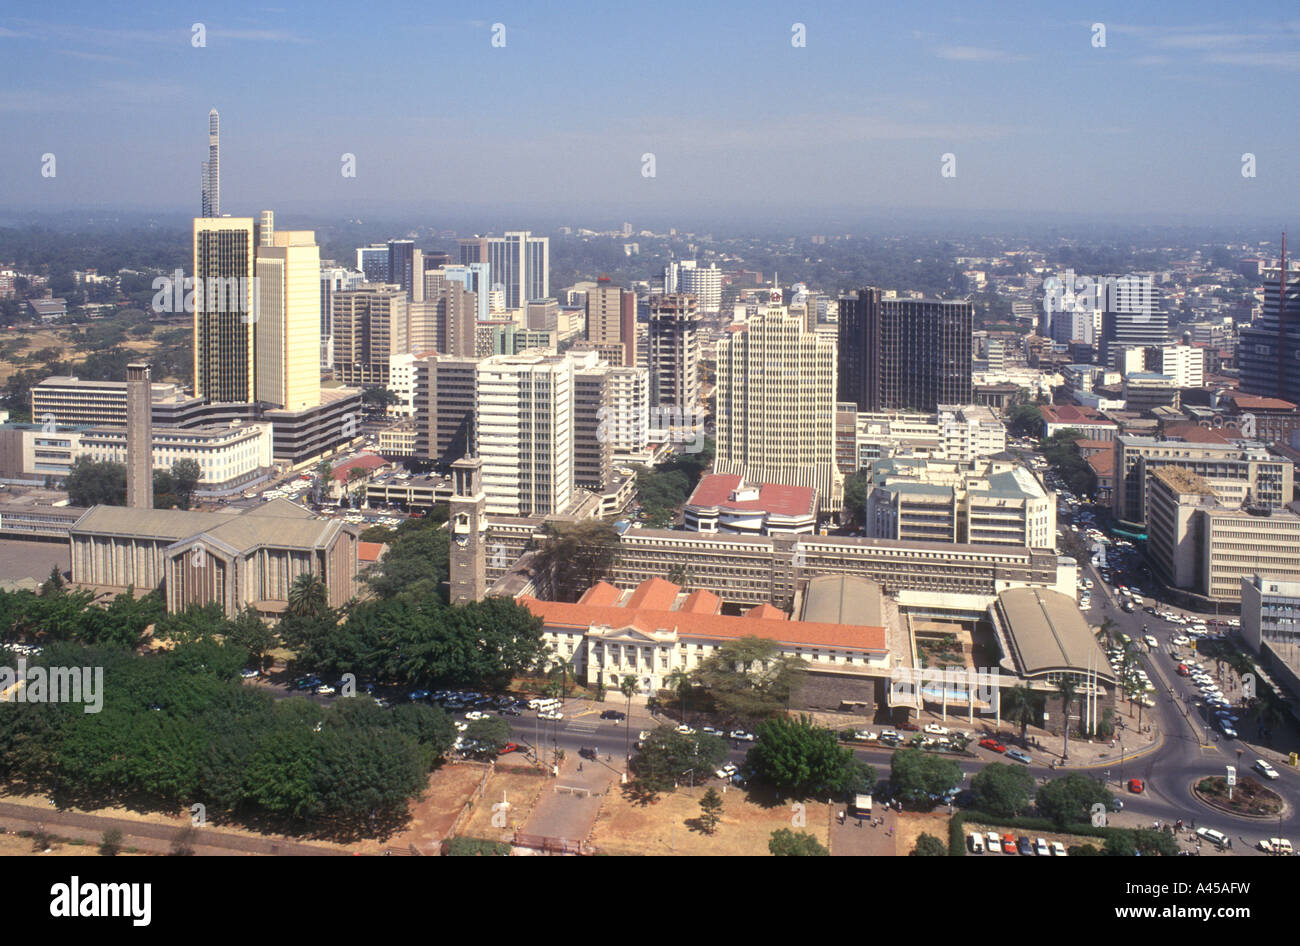 Nairobi city centre Kenya East Africa Seen from the top of the Jomo Kenyatta International Conference Centre tower Stock Photo